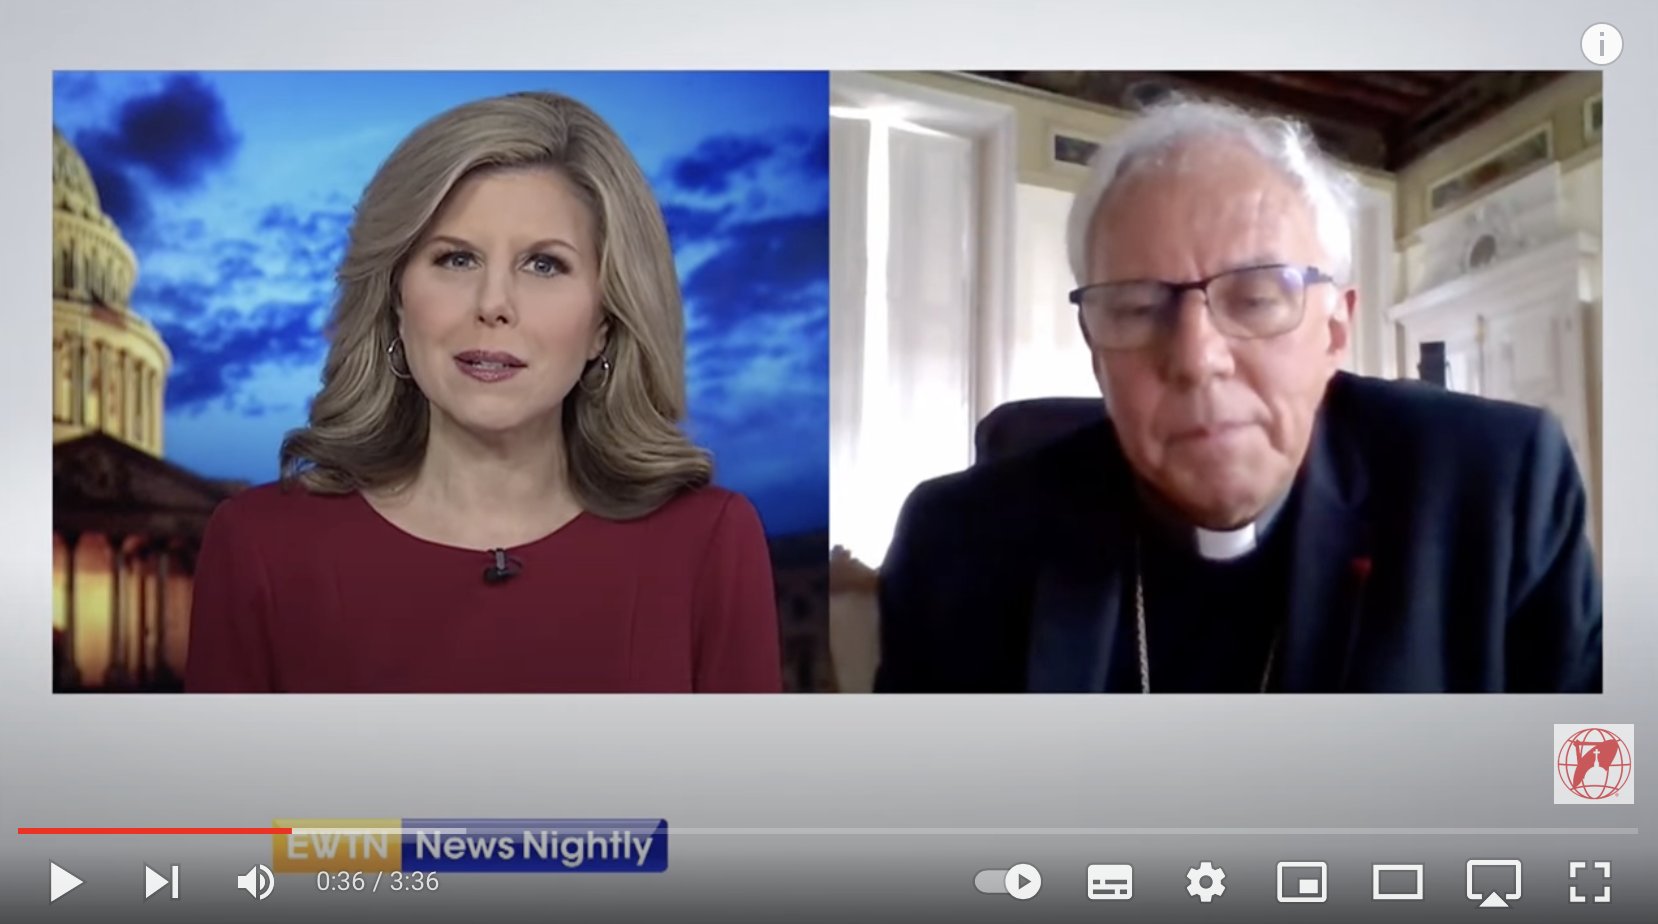 Mgr. Herouard's interview on the European Catholic Social Days